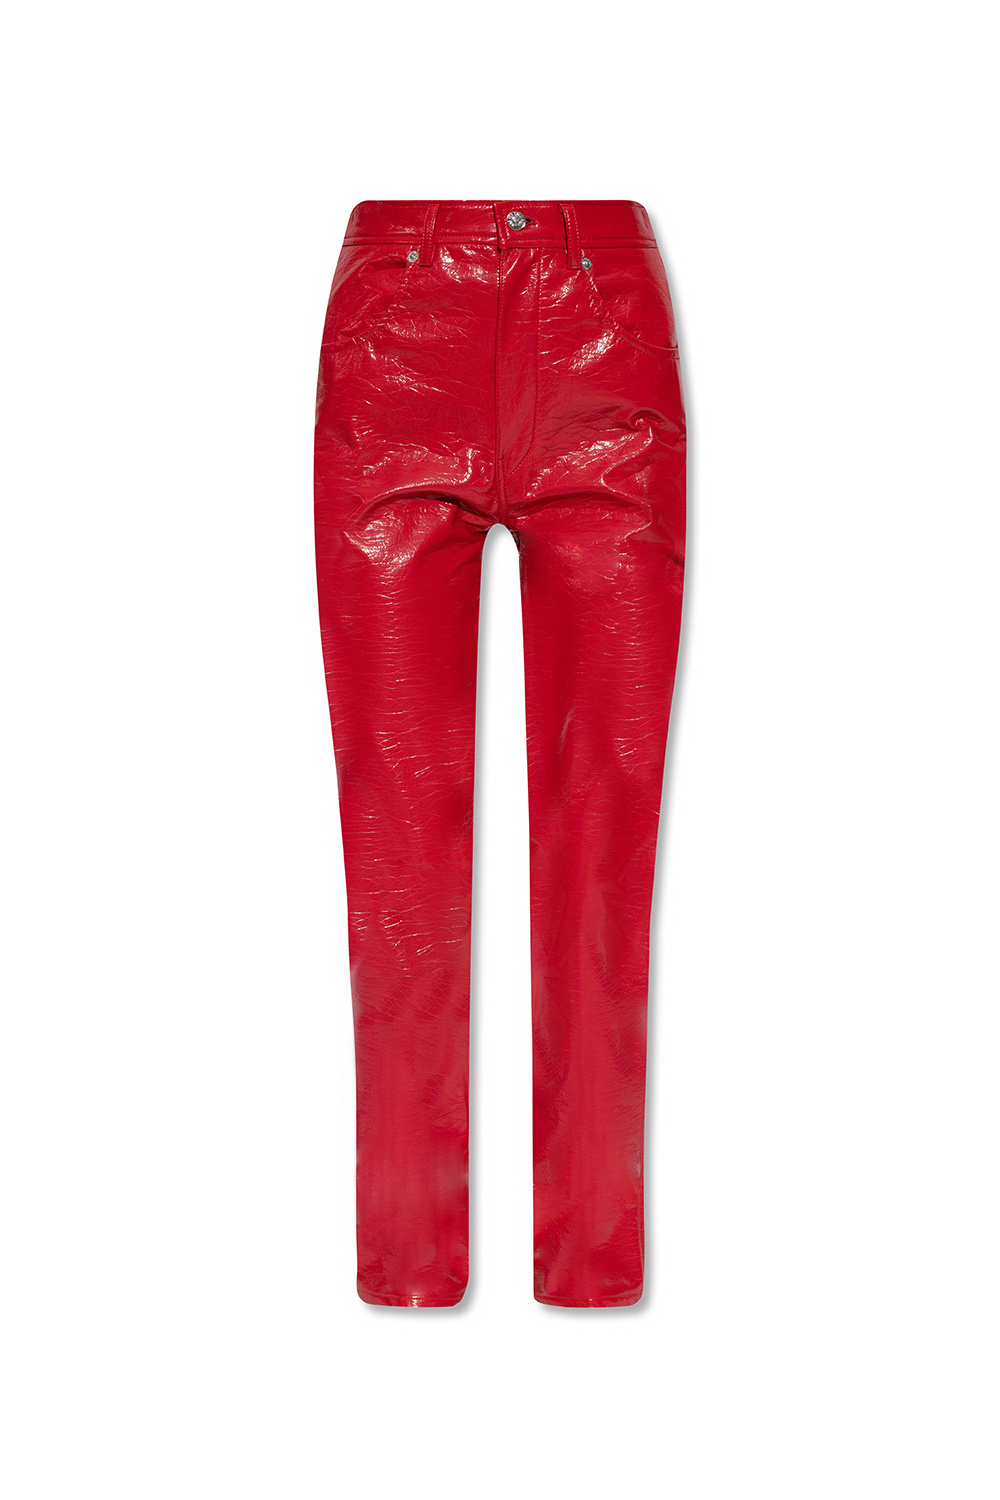 Diesel 'P-Arcy' dot trousers